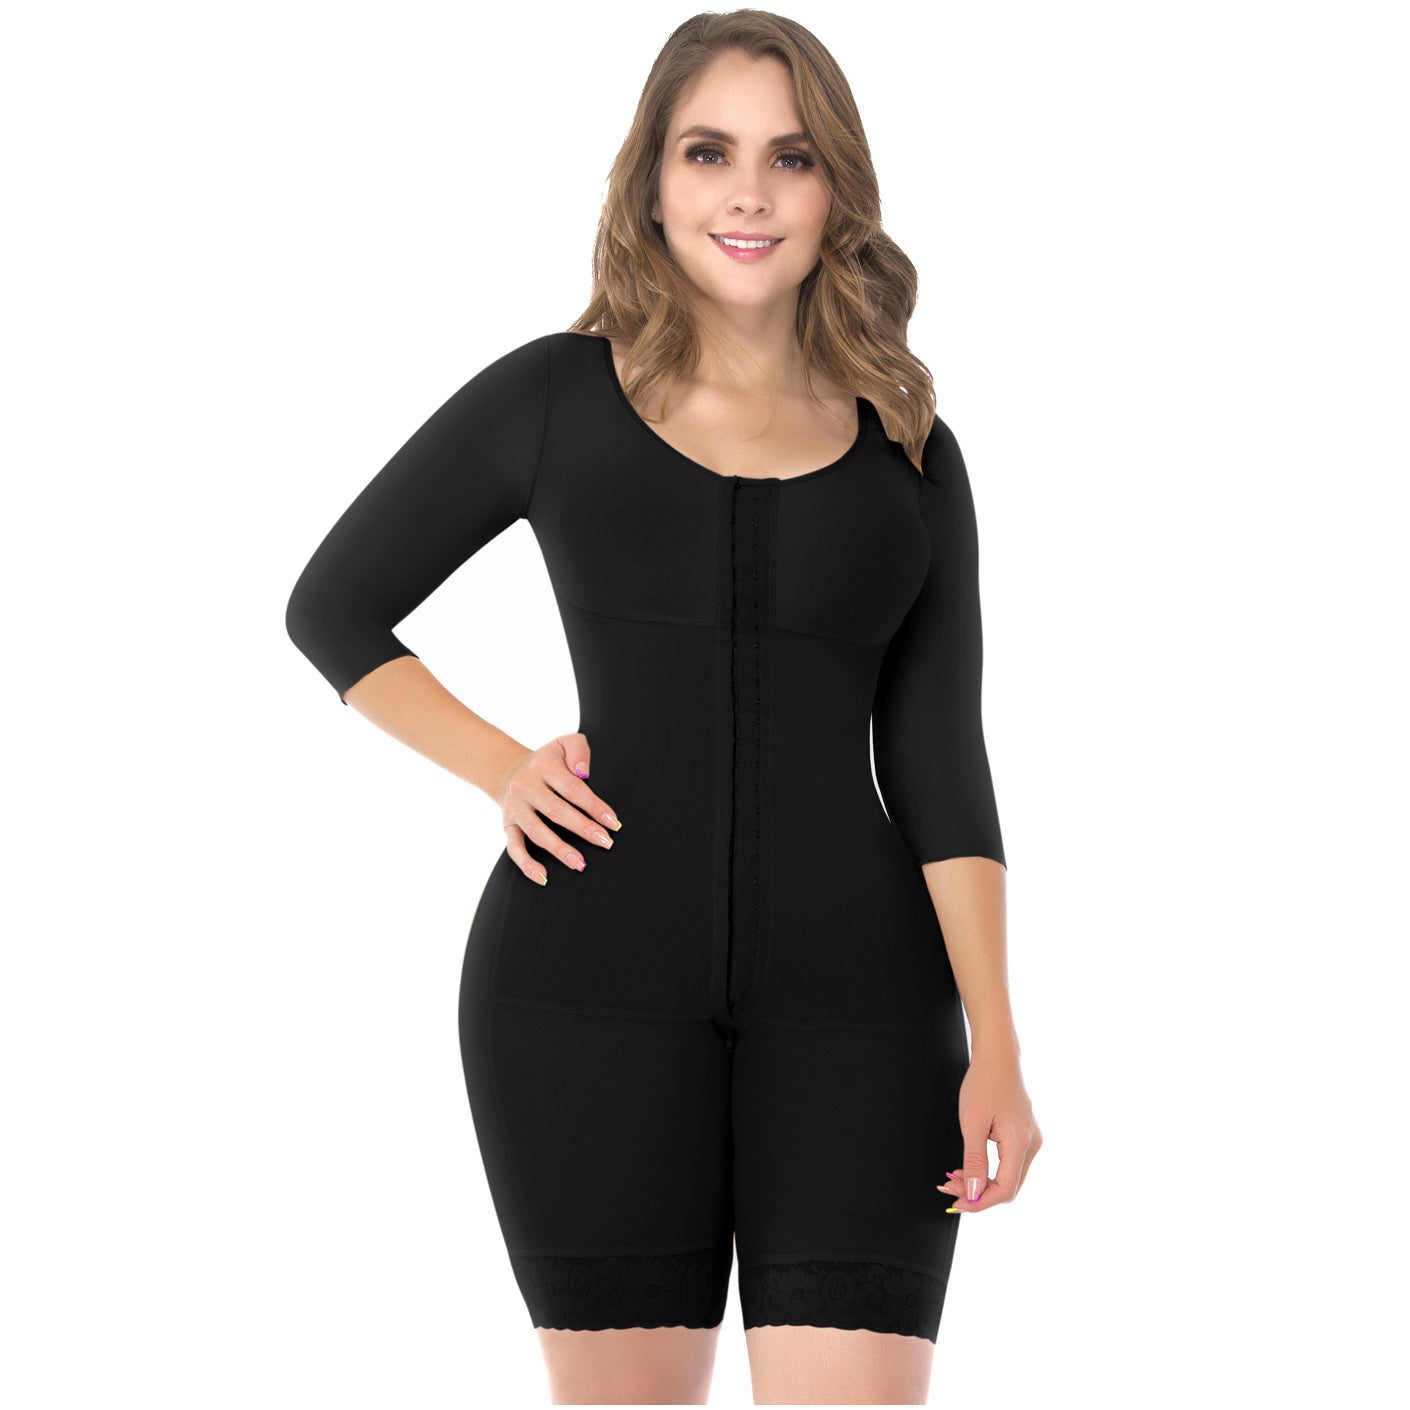 UpLady 6189  Post Surgery Full Shapewear with Built-in Bra for